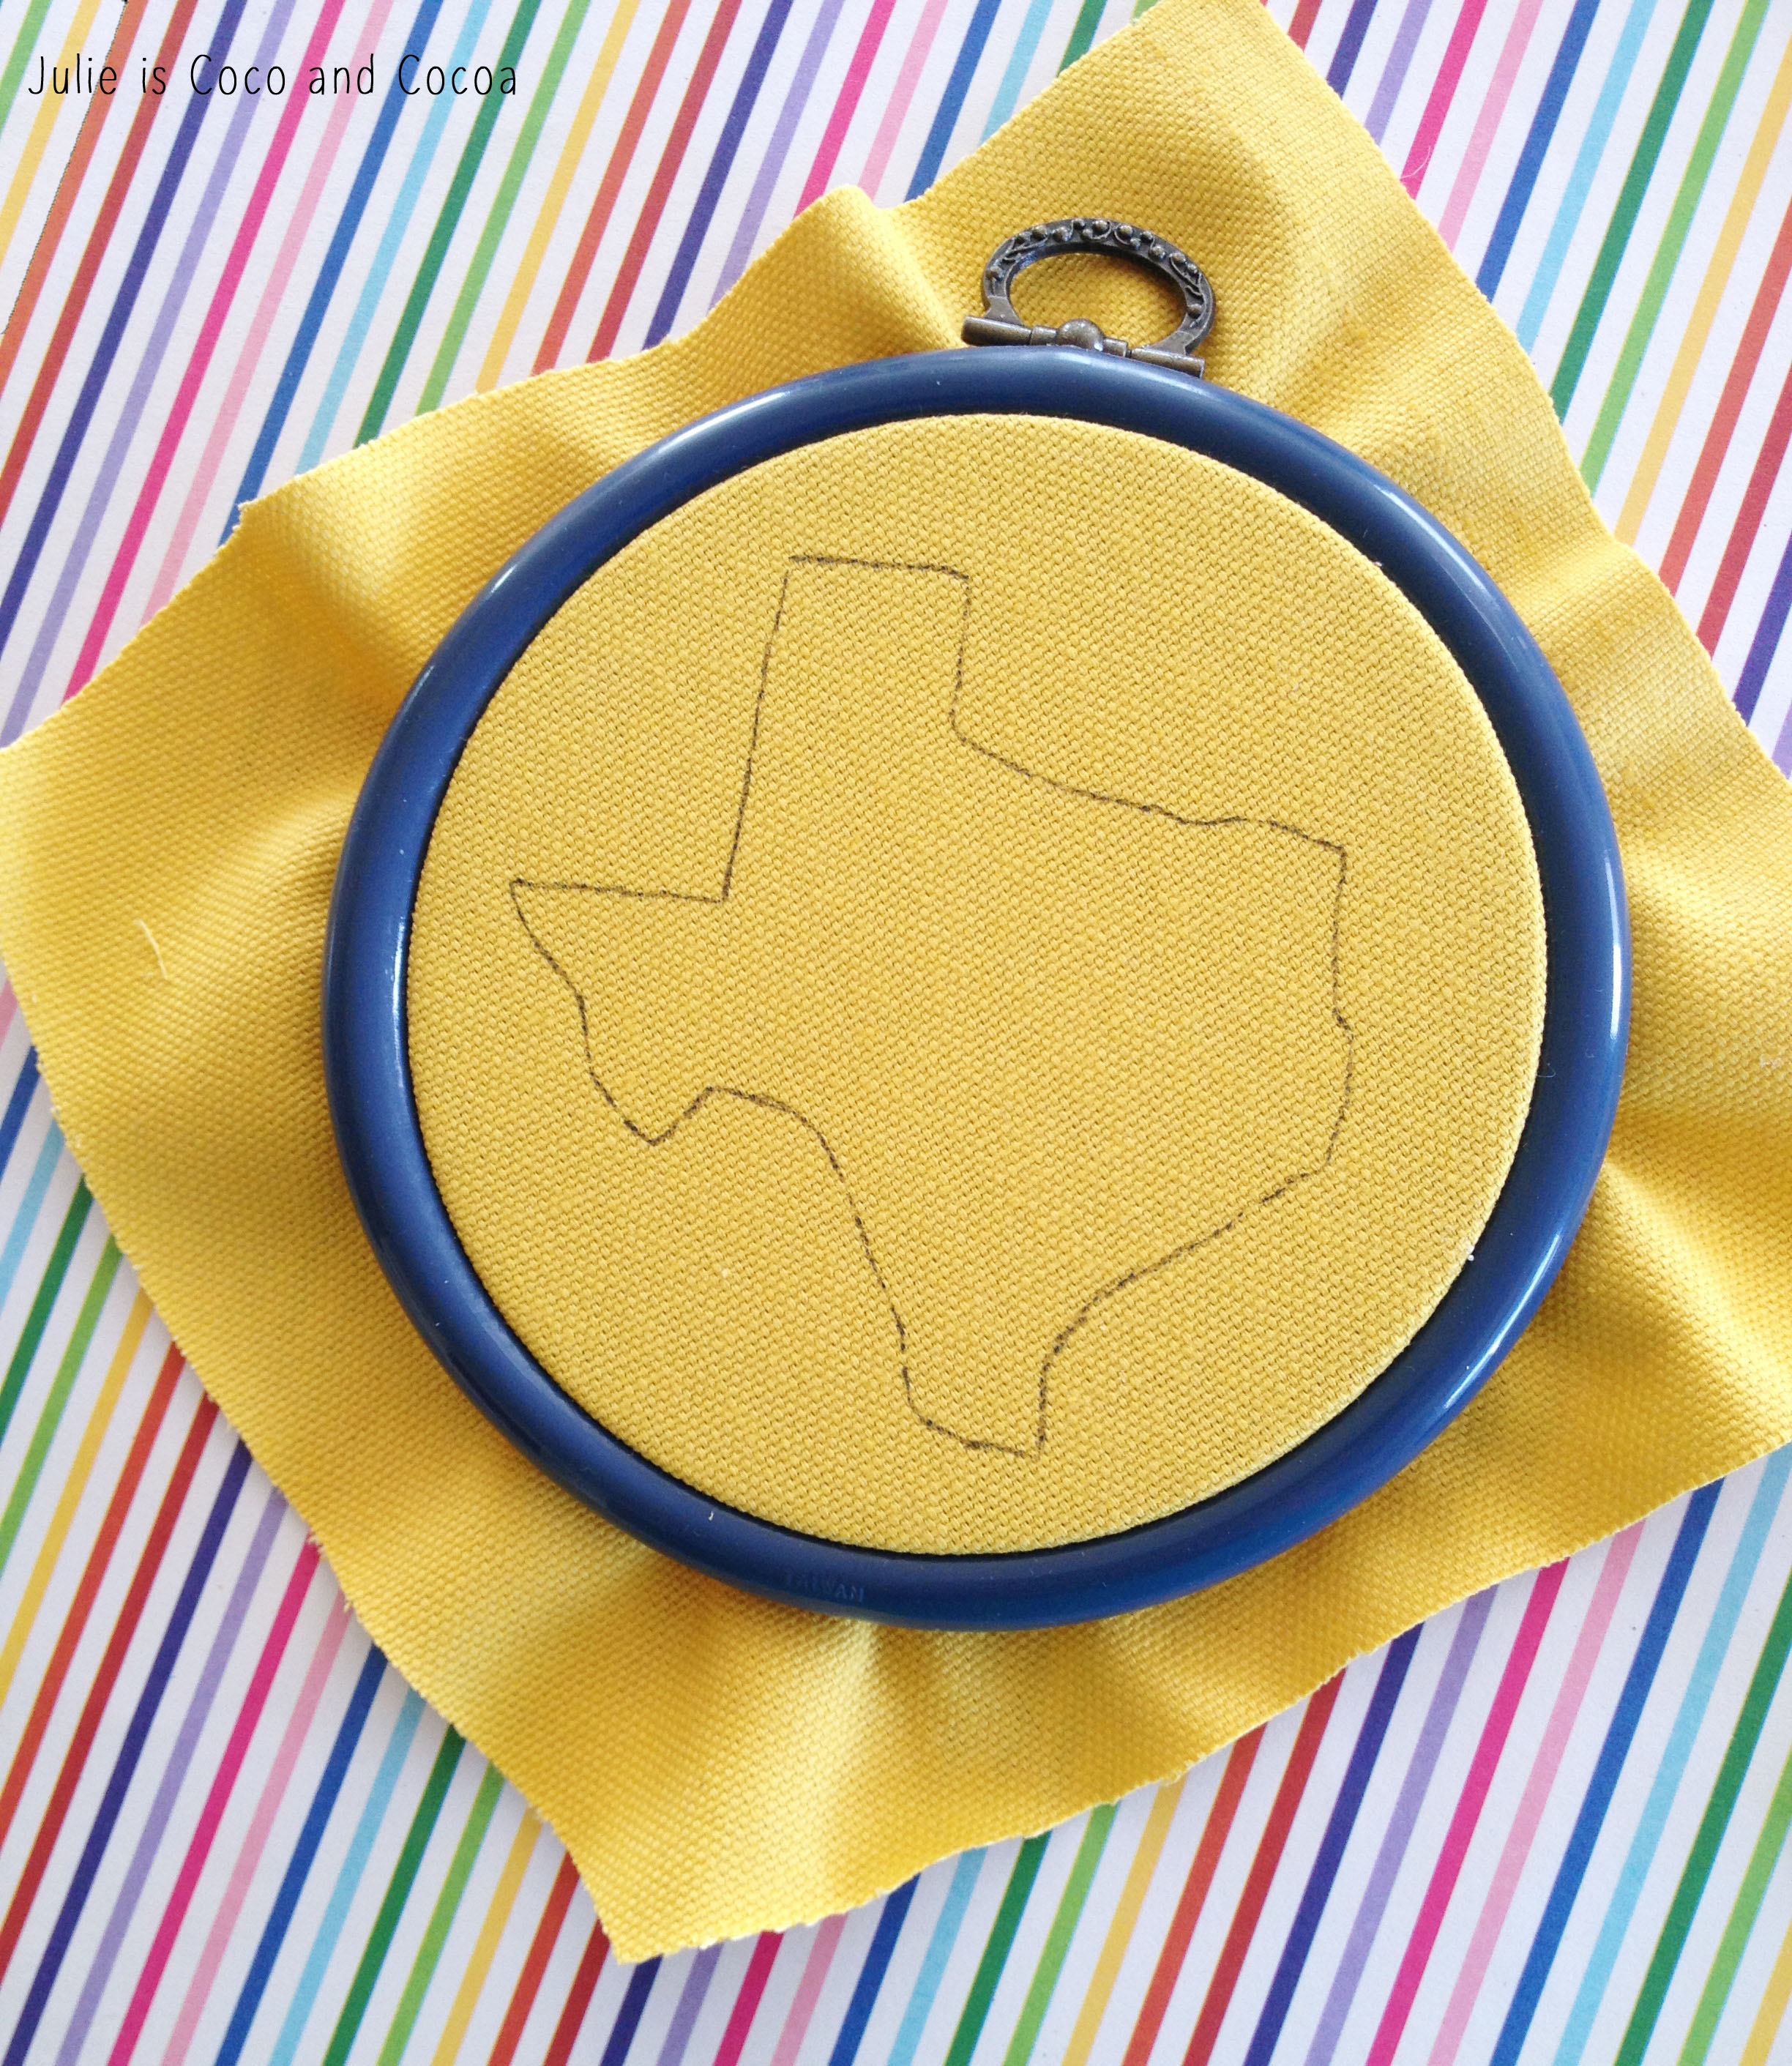 texas rainbow button embroidery tracing